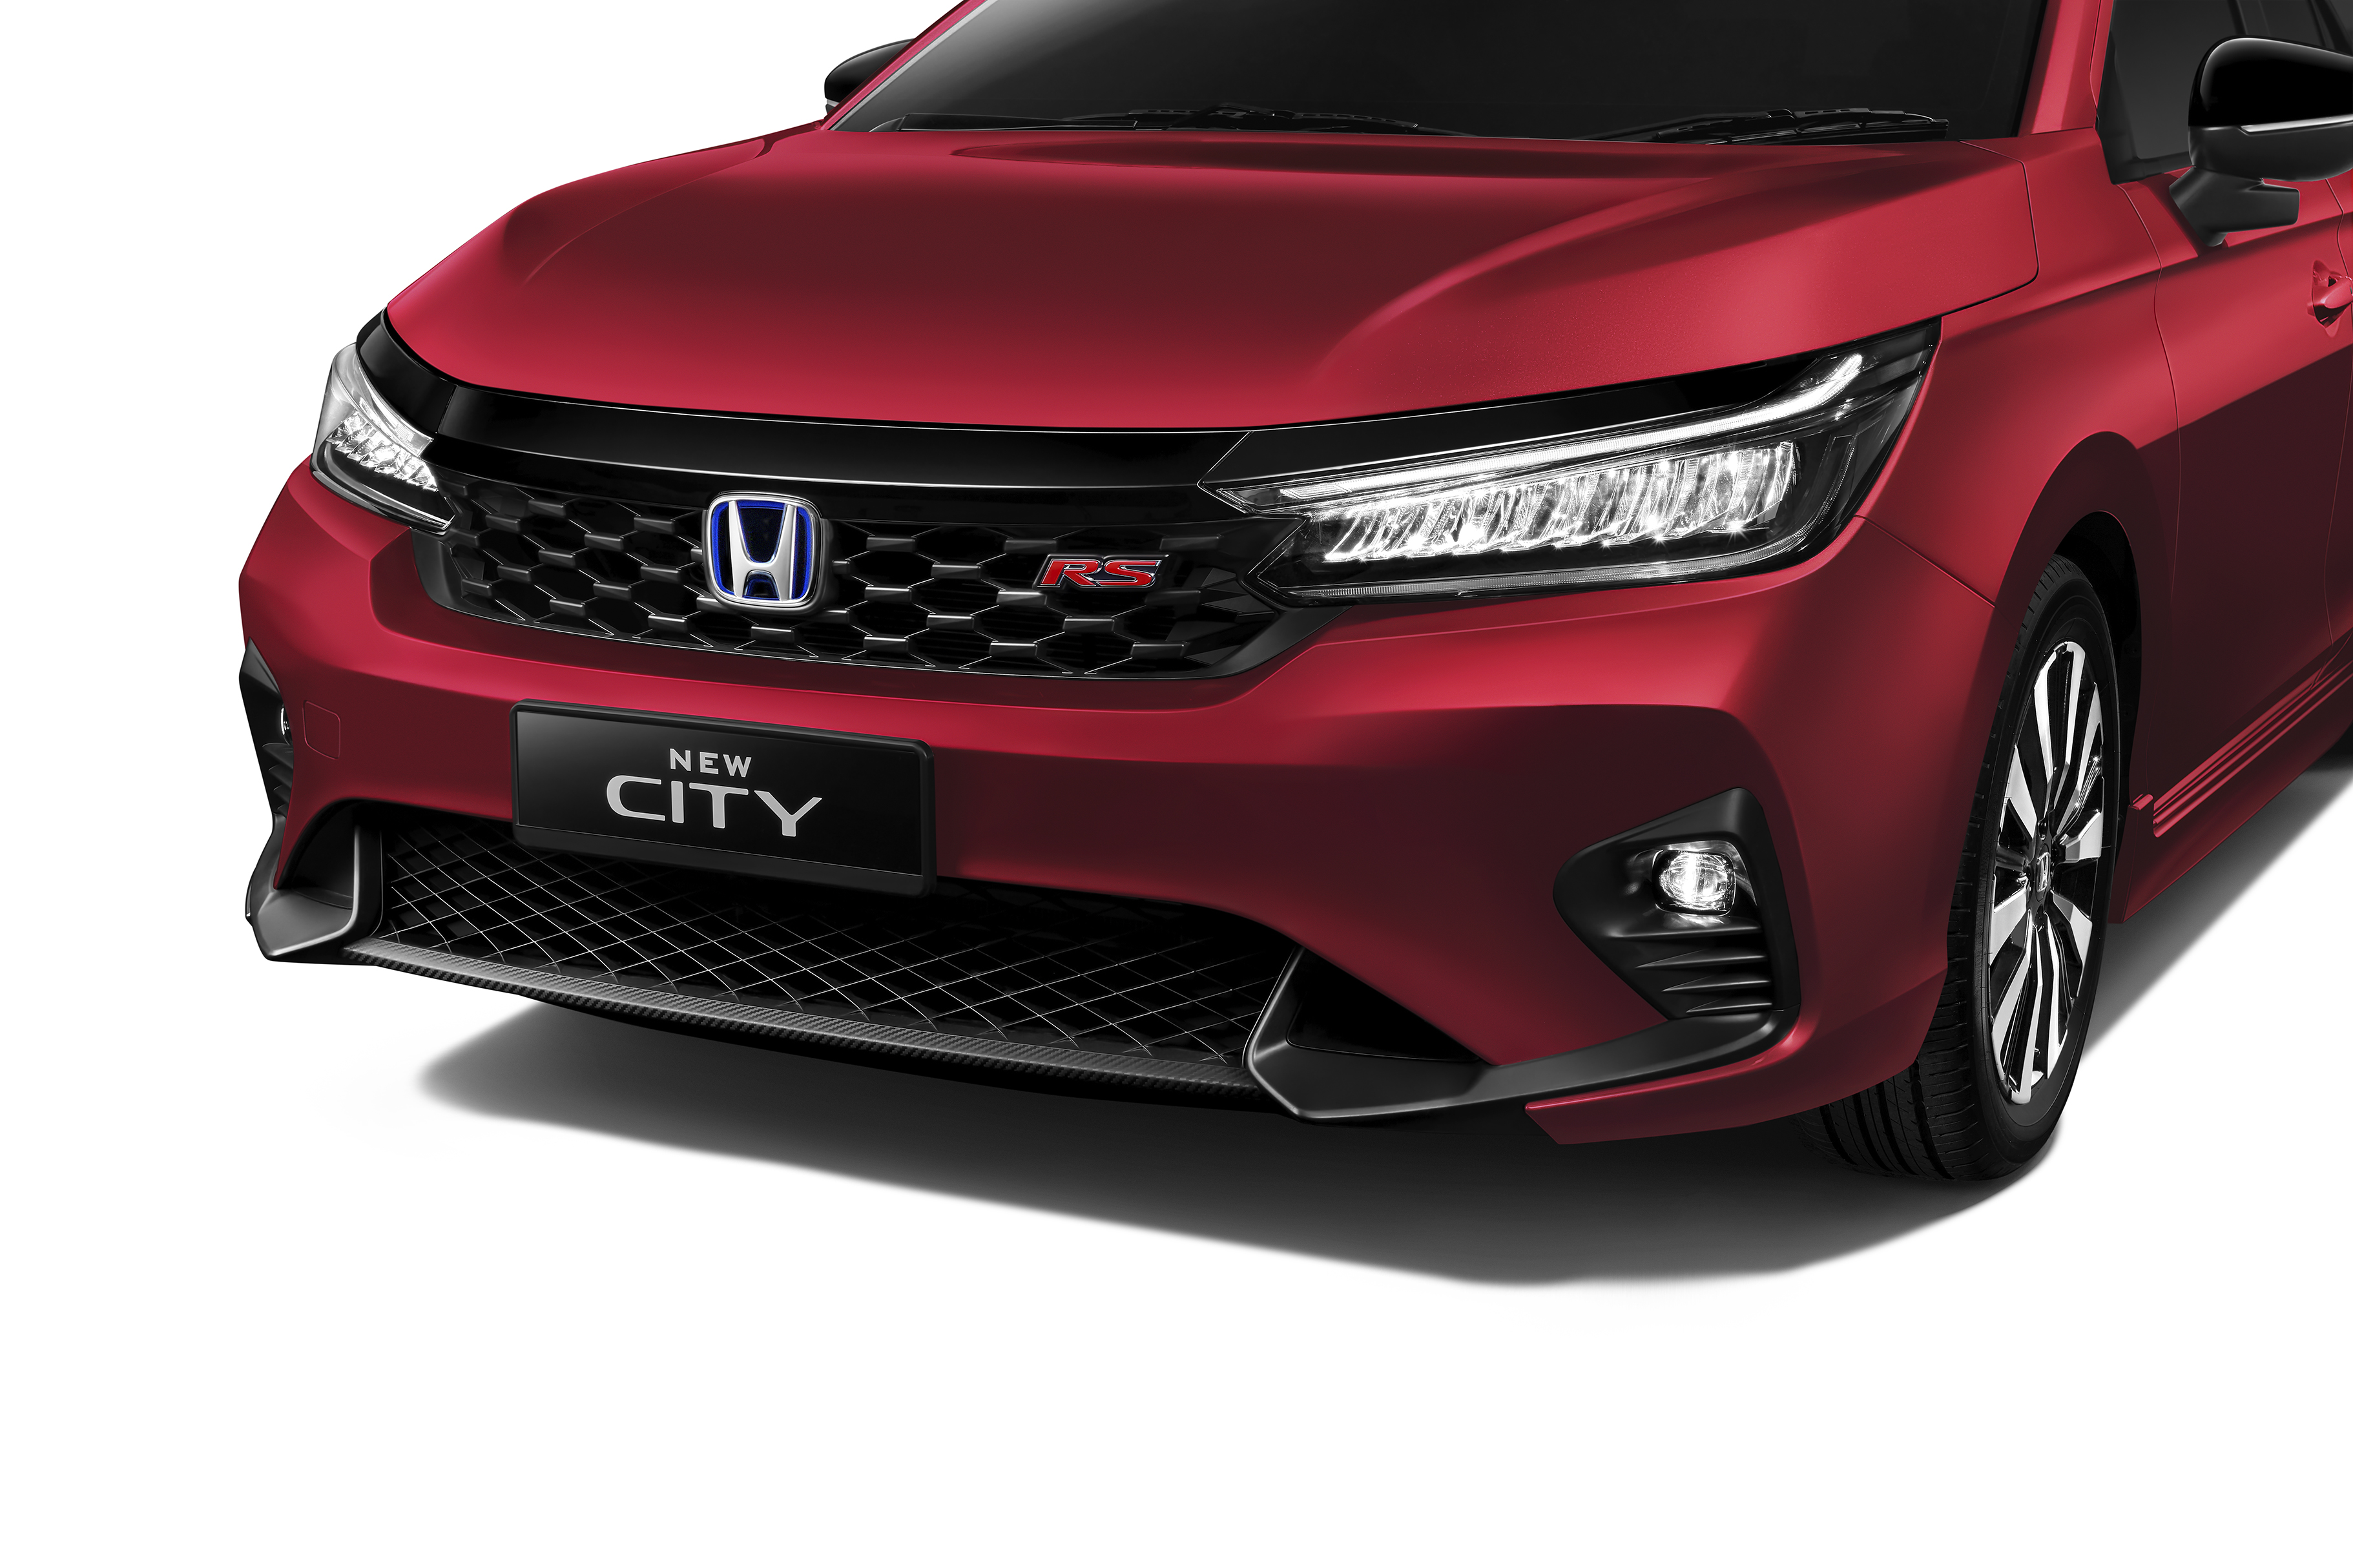 Best-selling Honda Model Gets More Ambitious, New City Open For Booking - thumbnail